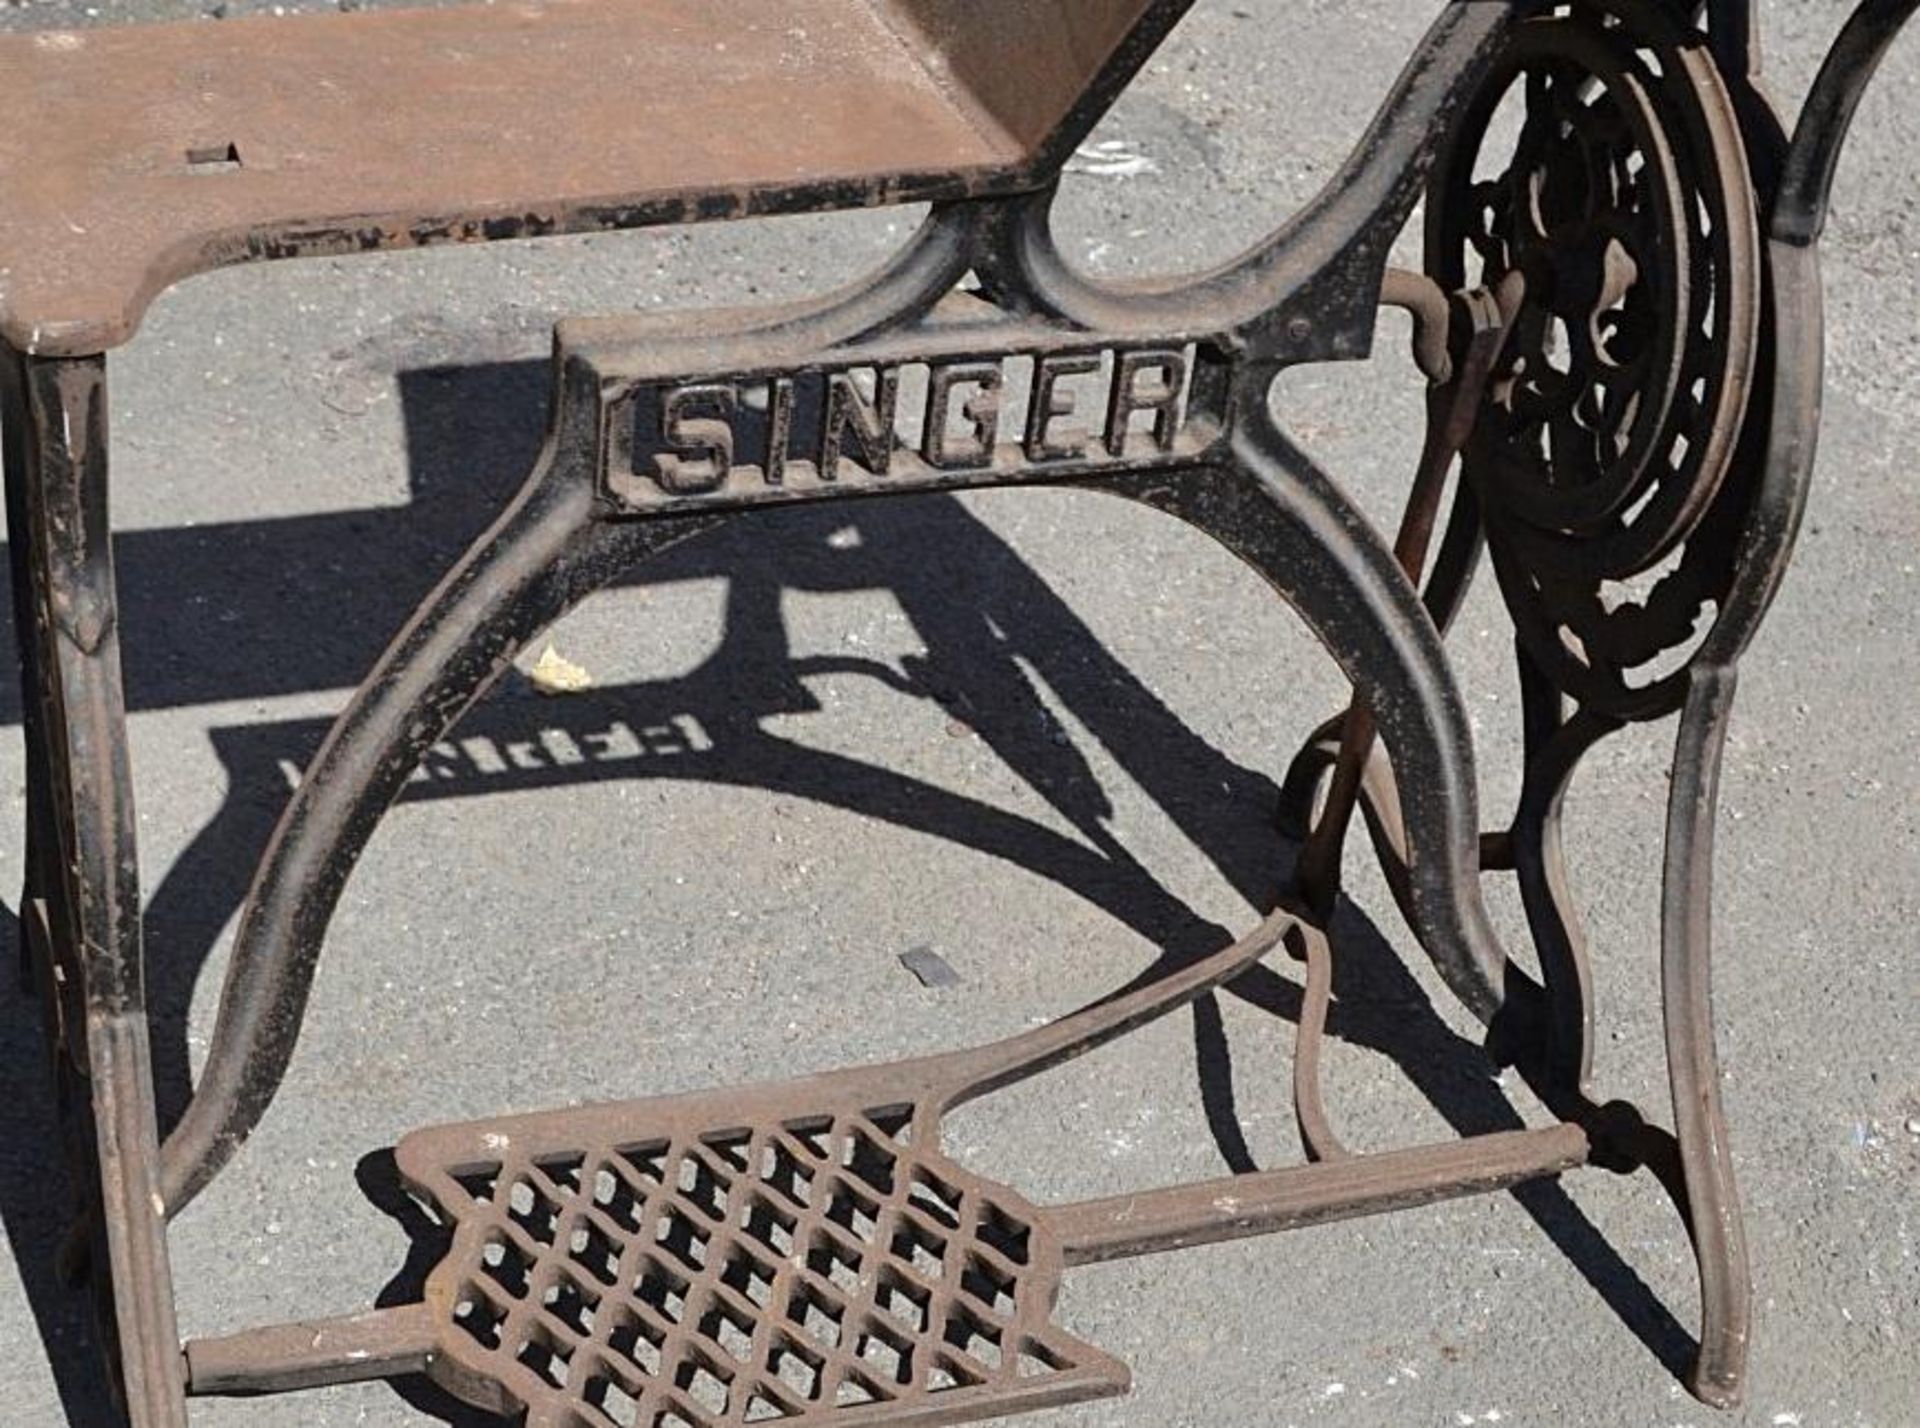 1 x Antique SINGER Cast Iron Sewing Machine Treadle Base - Features Working Peddle And Wheel Motion - Image 2 of 4